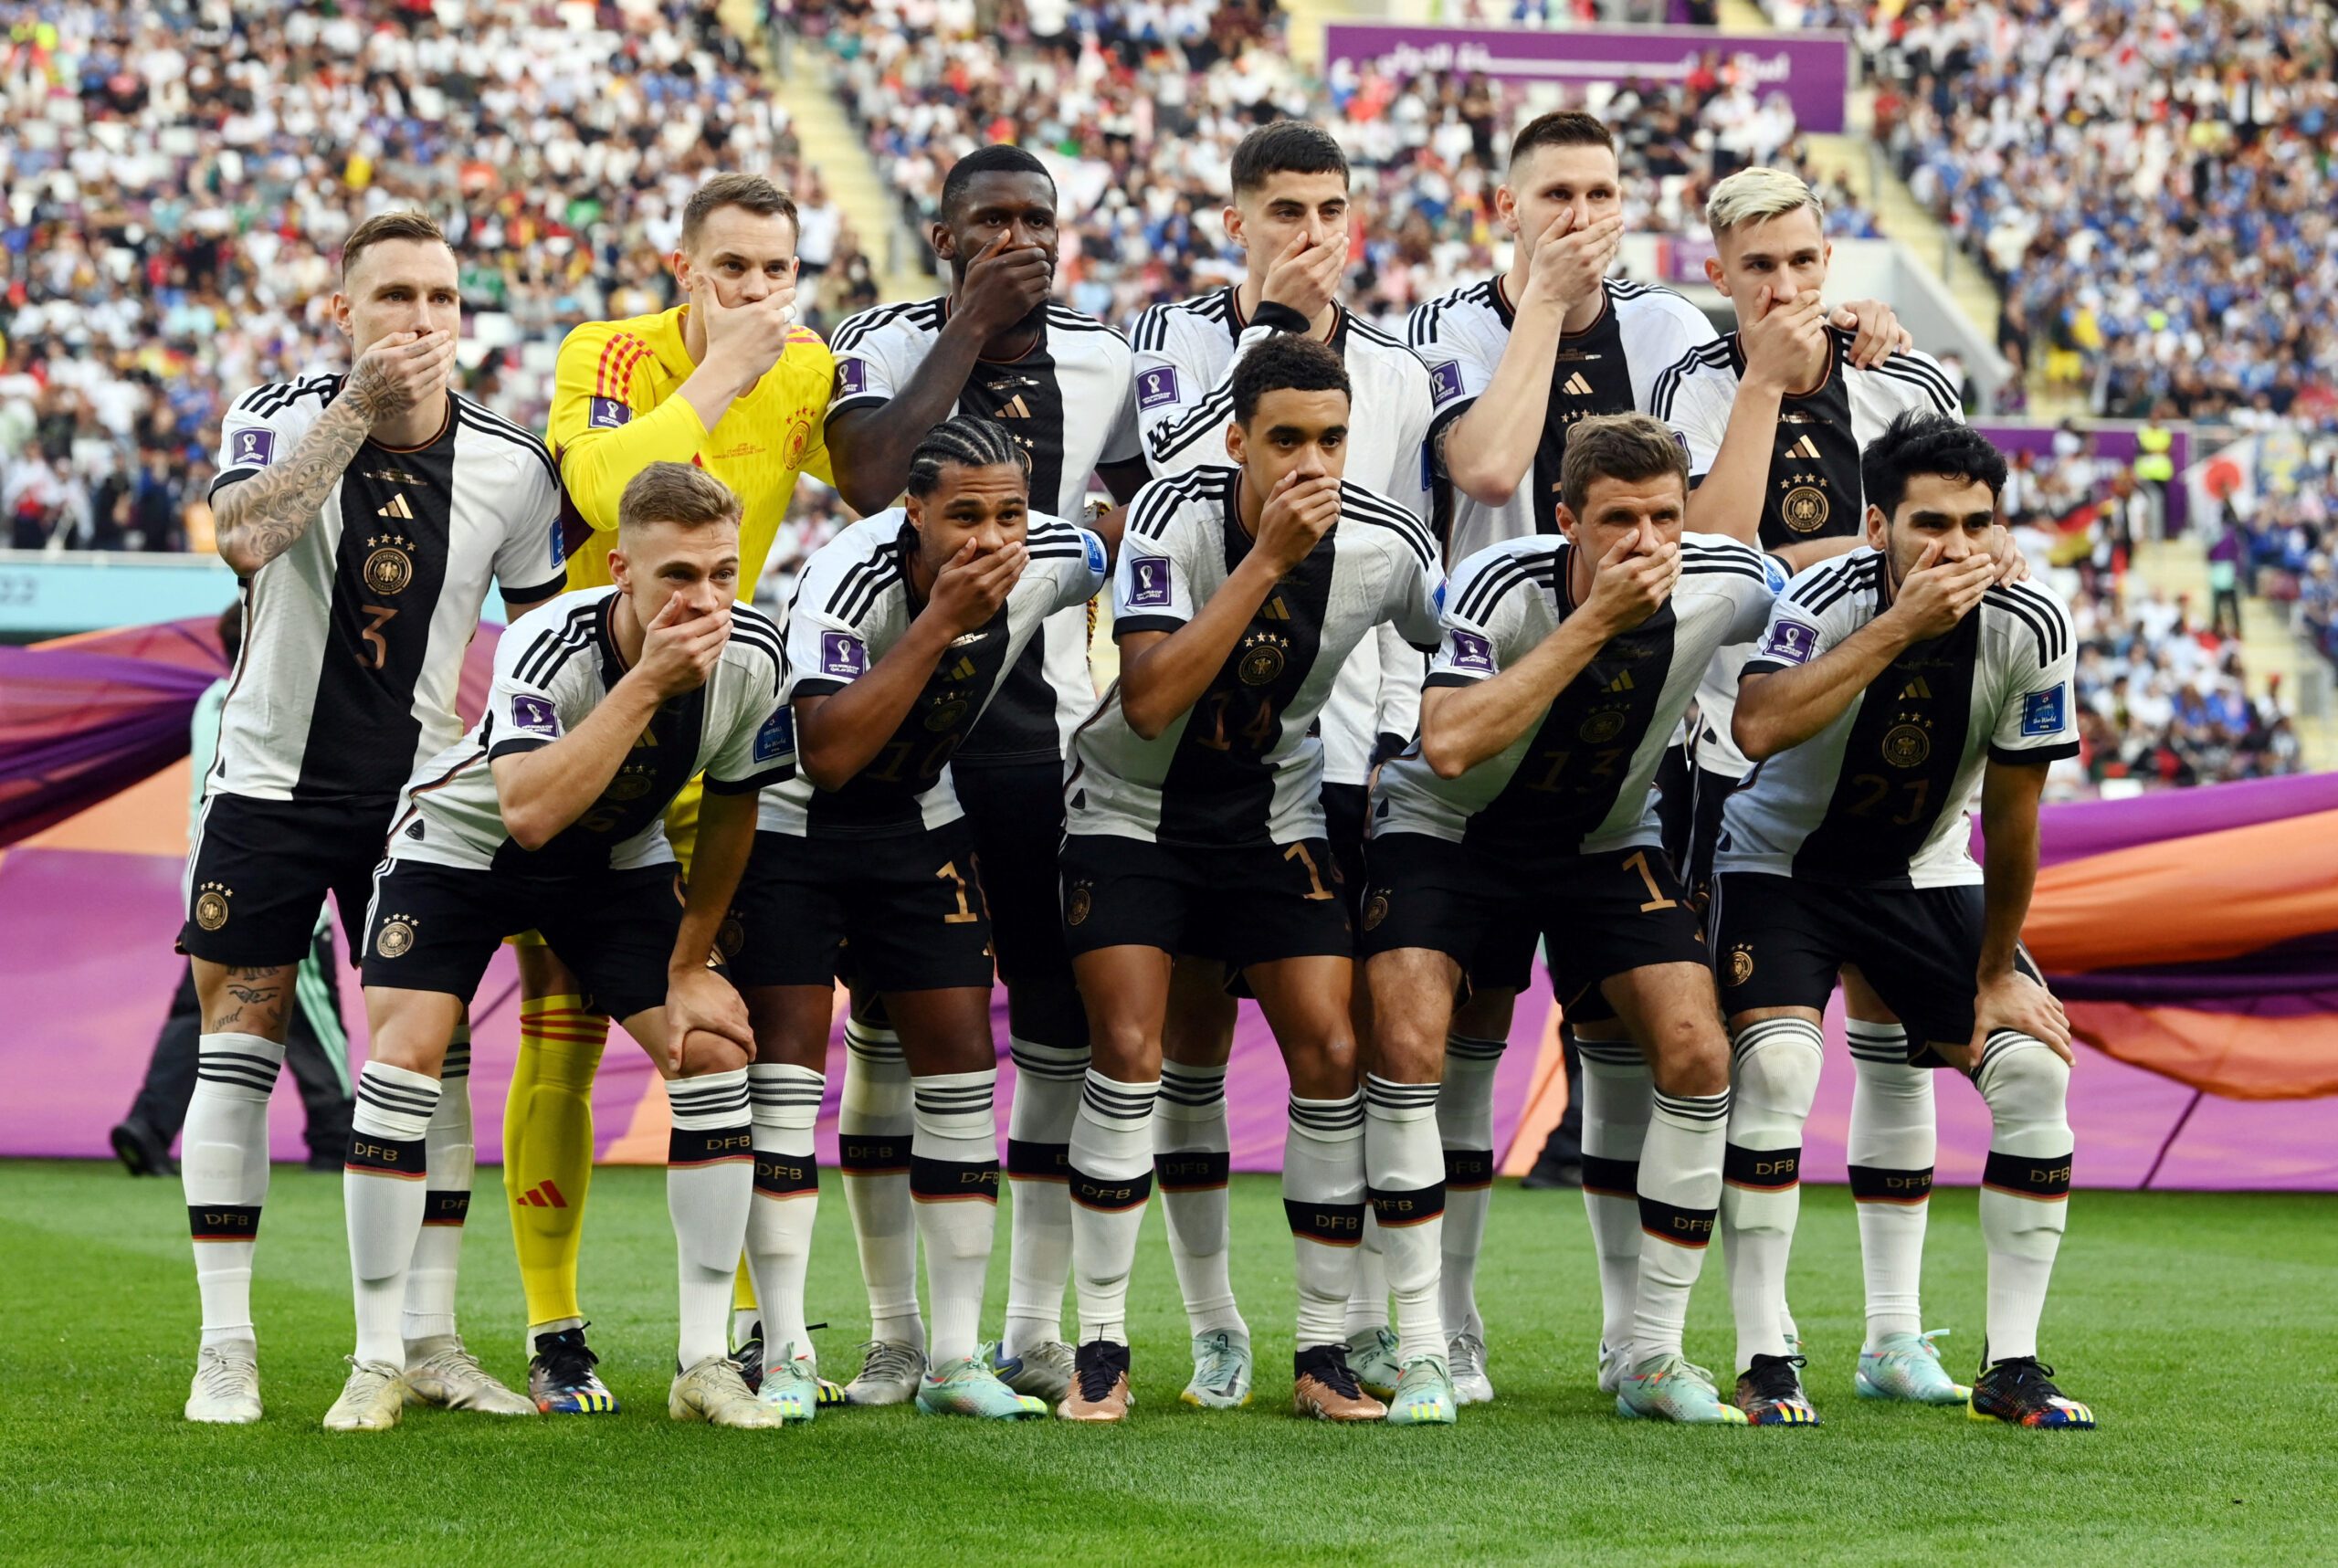 Germany players cover mouths in team photo amid armband row